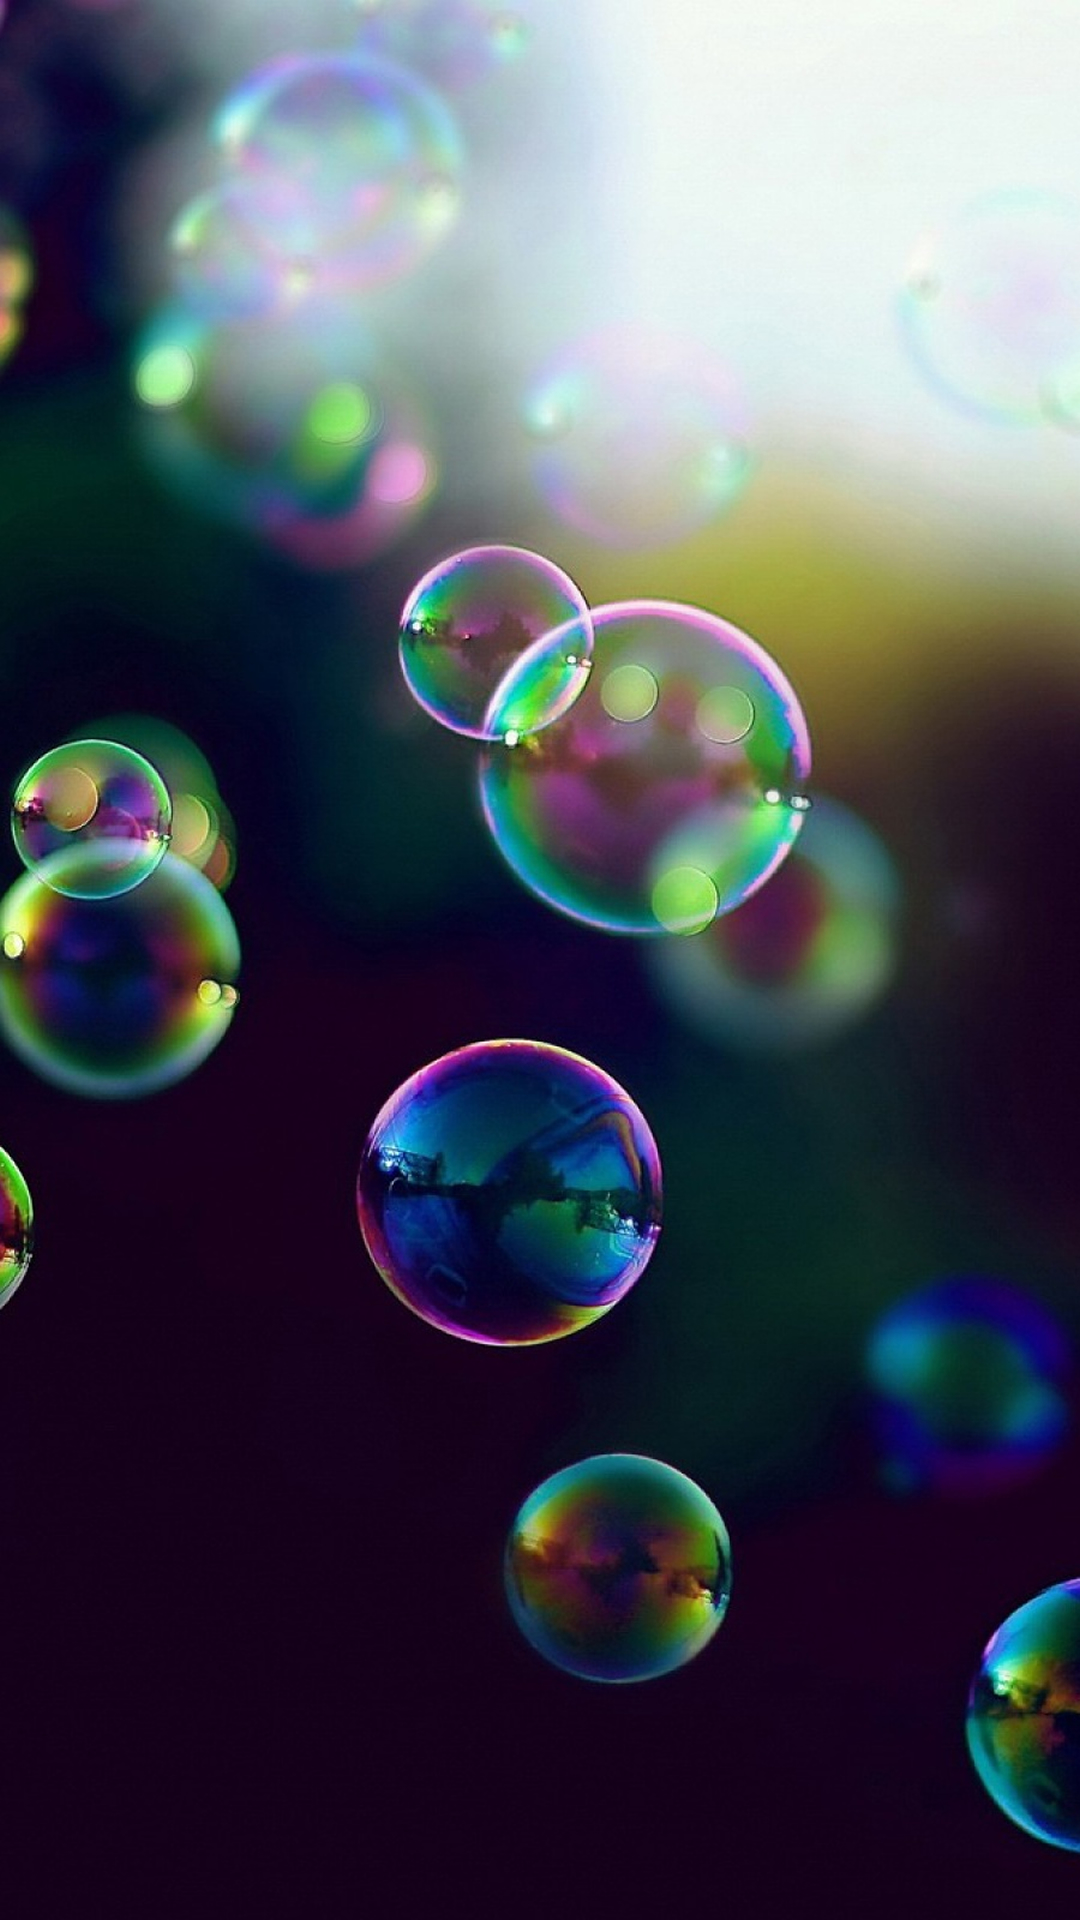 Download The Android Incredible Bubbles Wallpaper - Iphone Backgrounds Bubbles , HD Wallpaper & Backgrounds